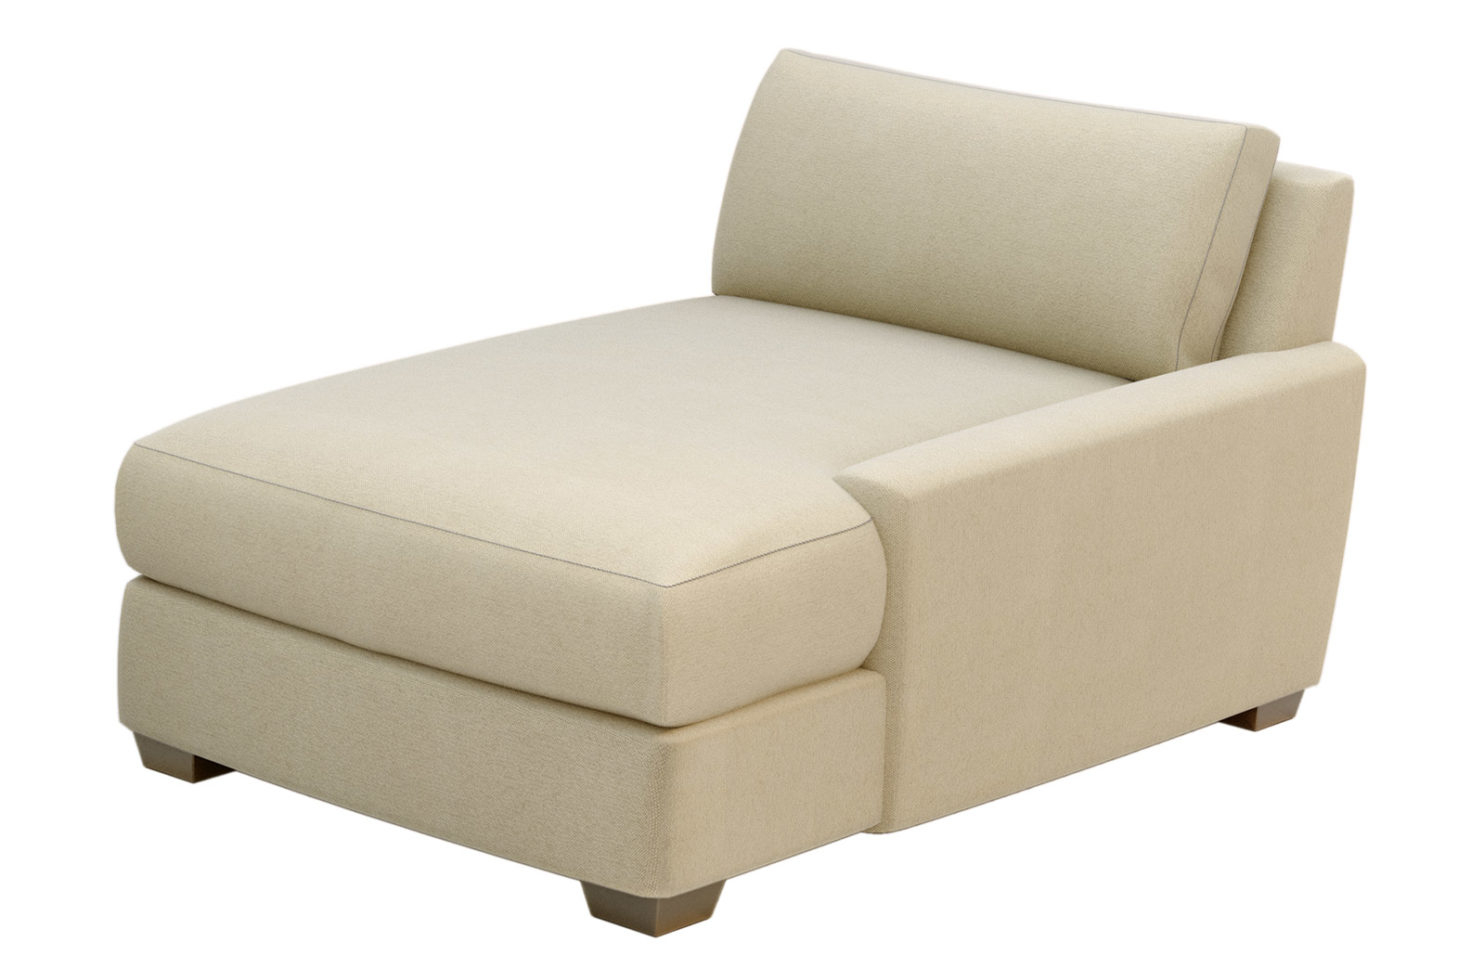 Seasonal Living Fizz Imperial Spritz One Arm Chaise – Right Arm Facing